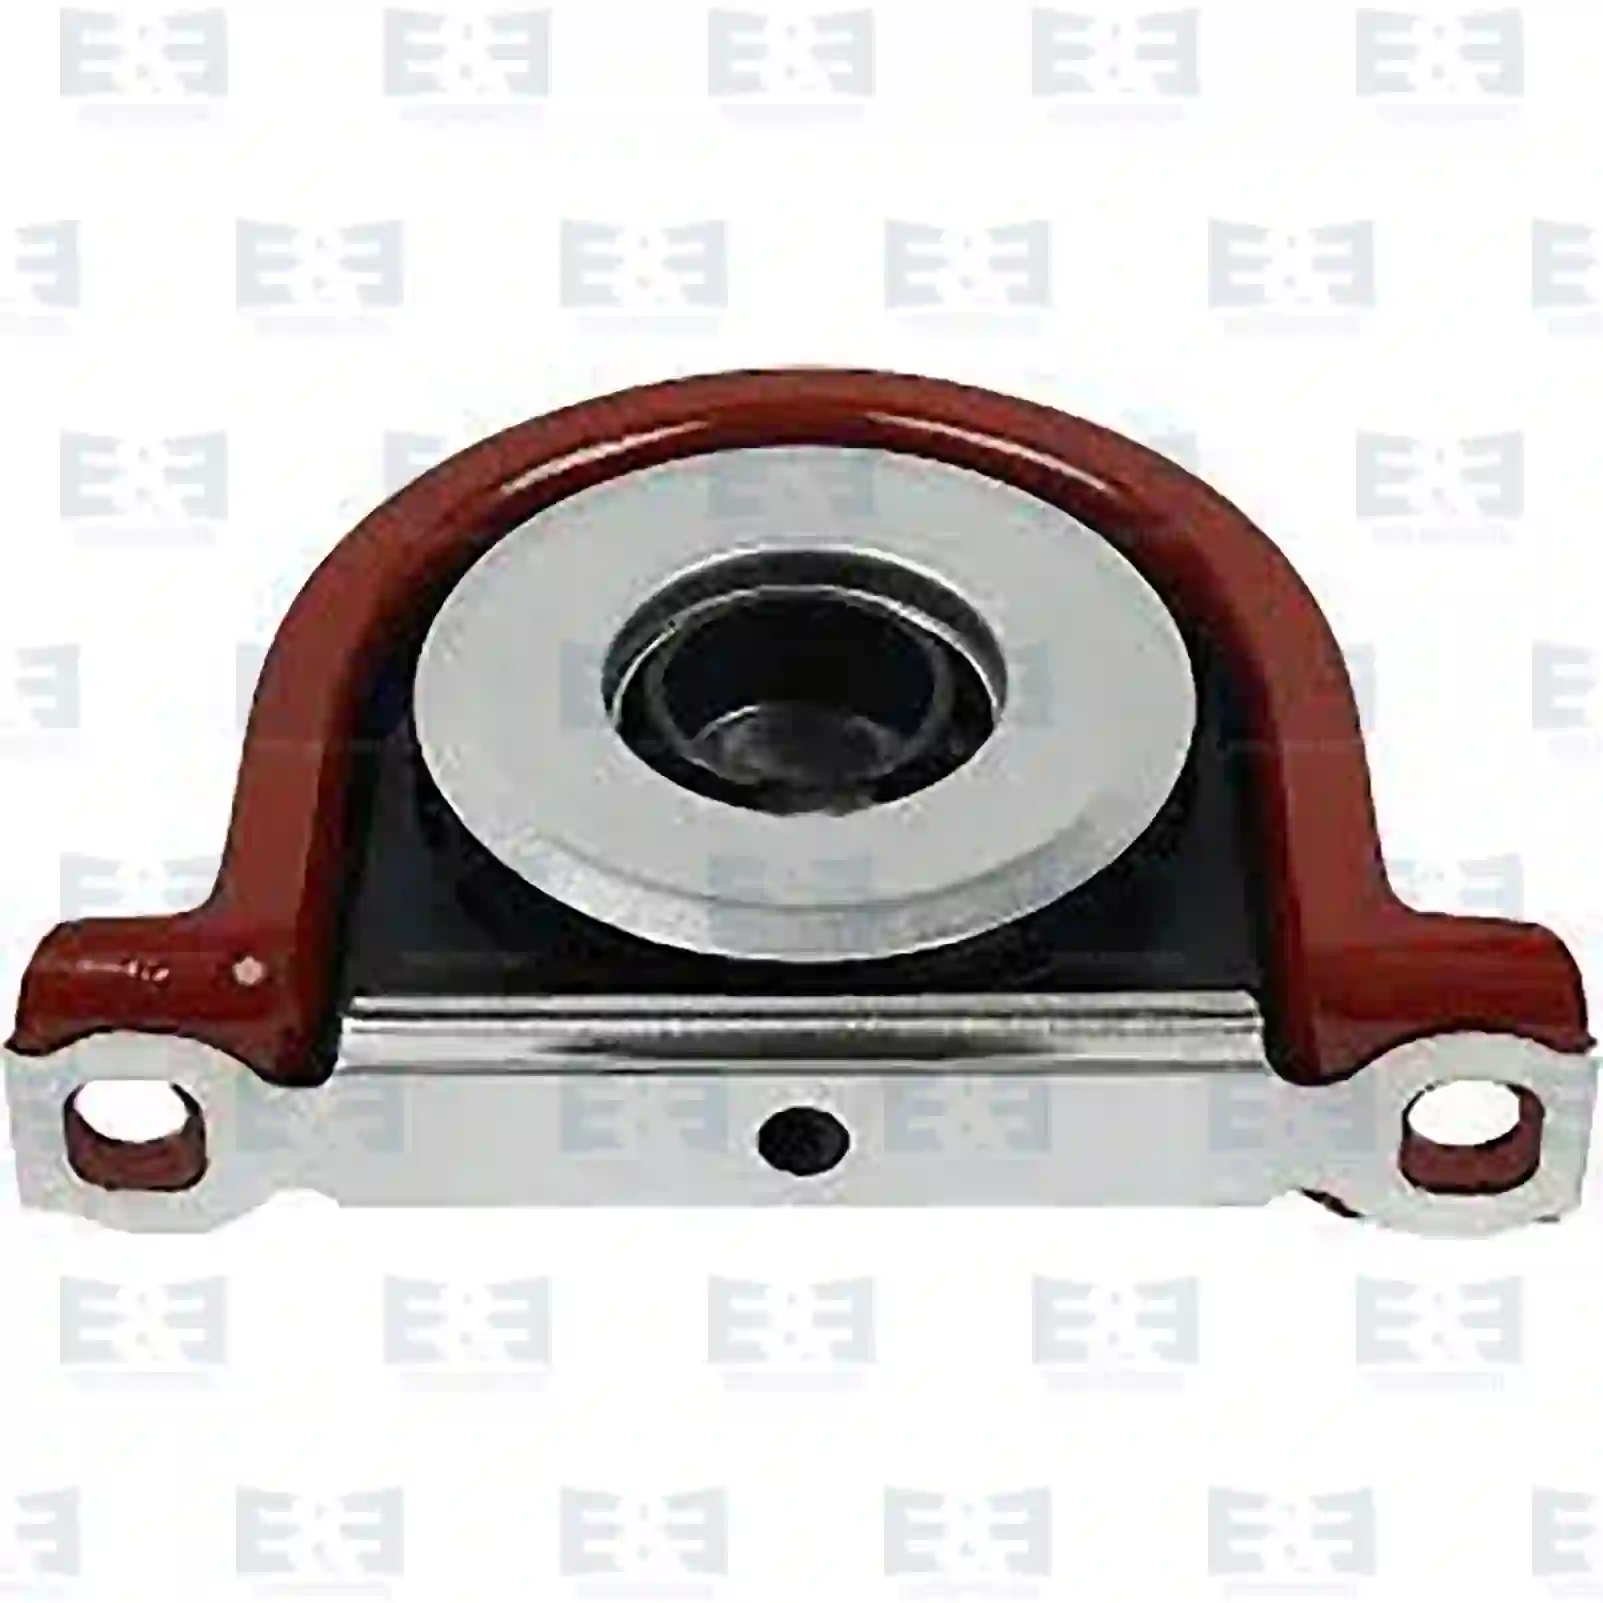 Support Bearing Center bearing, EE No 2E2276984 ,  oem no:42536726, 9316032 E&E Truck Spare Parts | Truck Spare Parts, Auotomotive Spare Parts